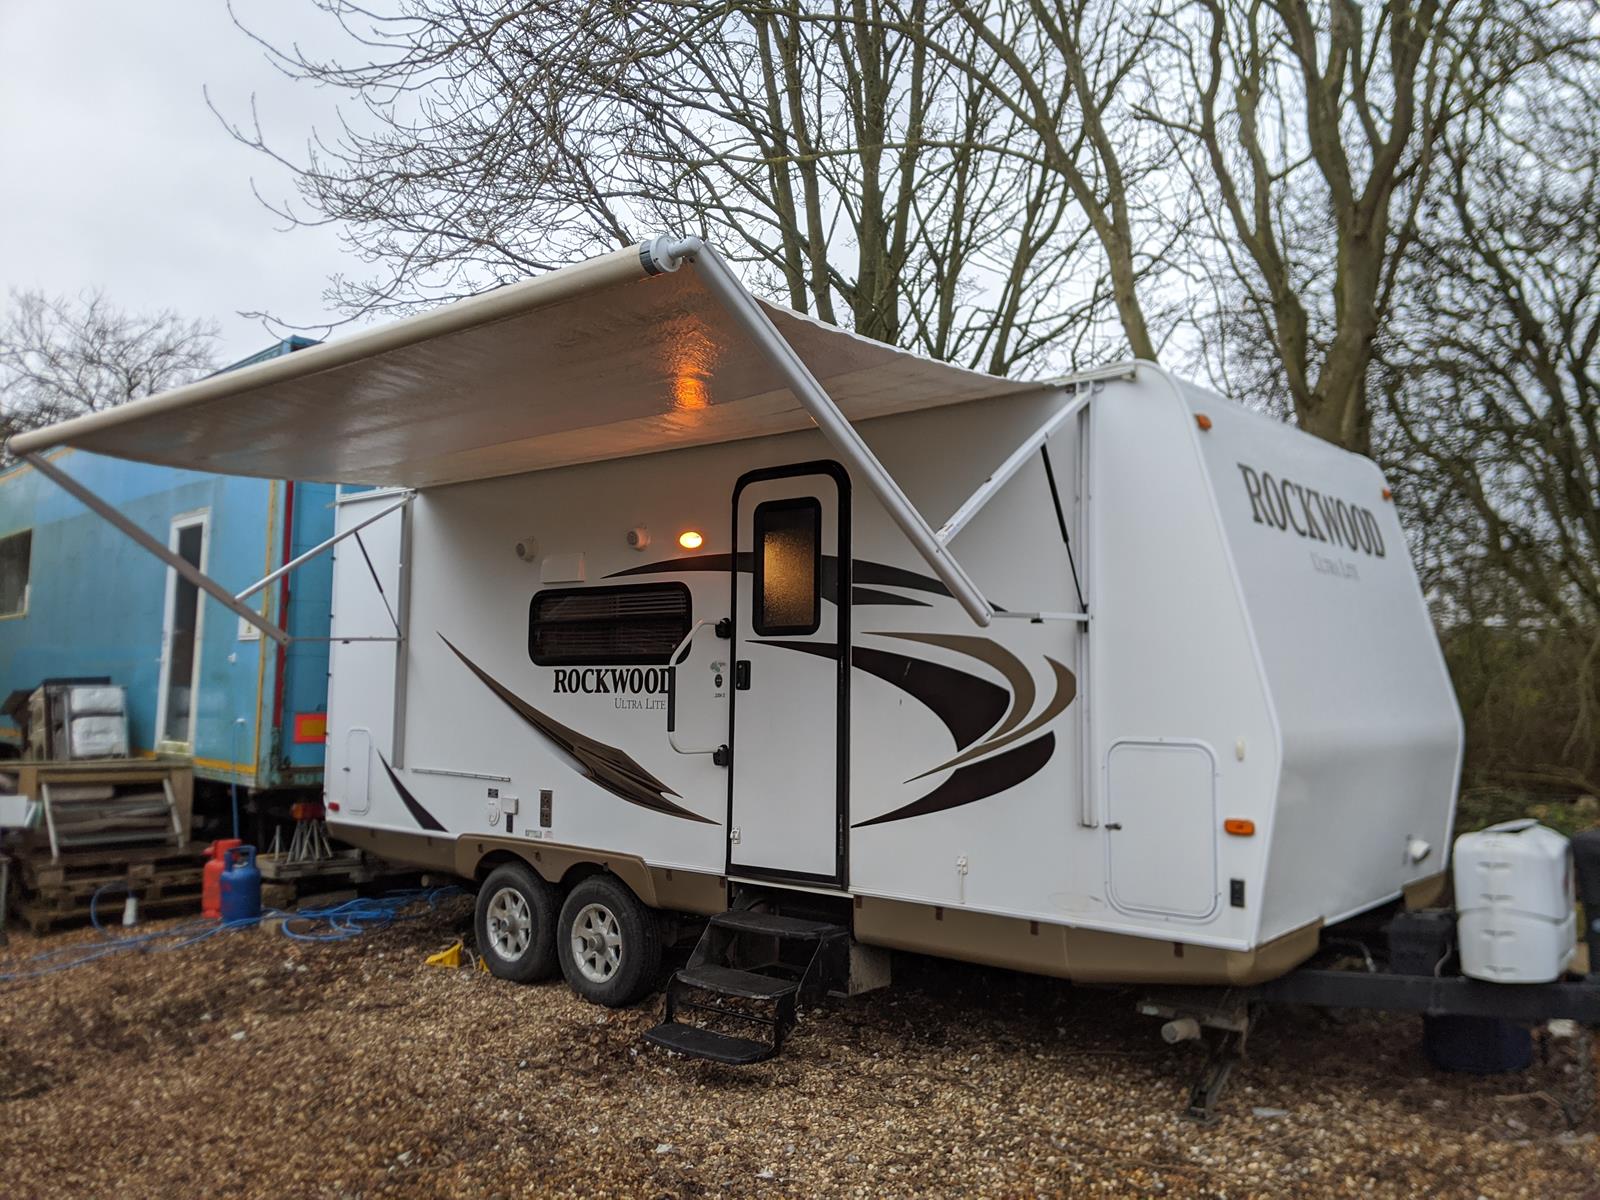 What Are The Benefits Of Buying Used Static Caravans?